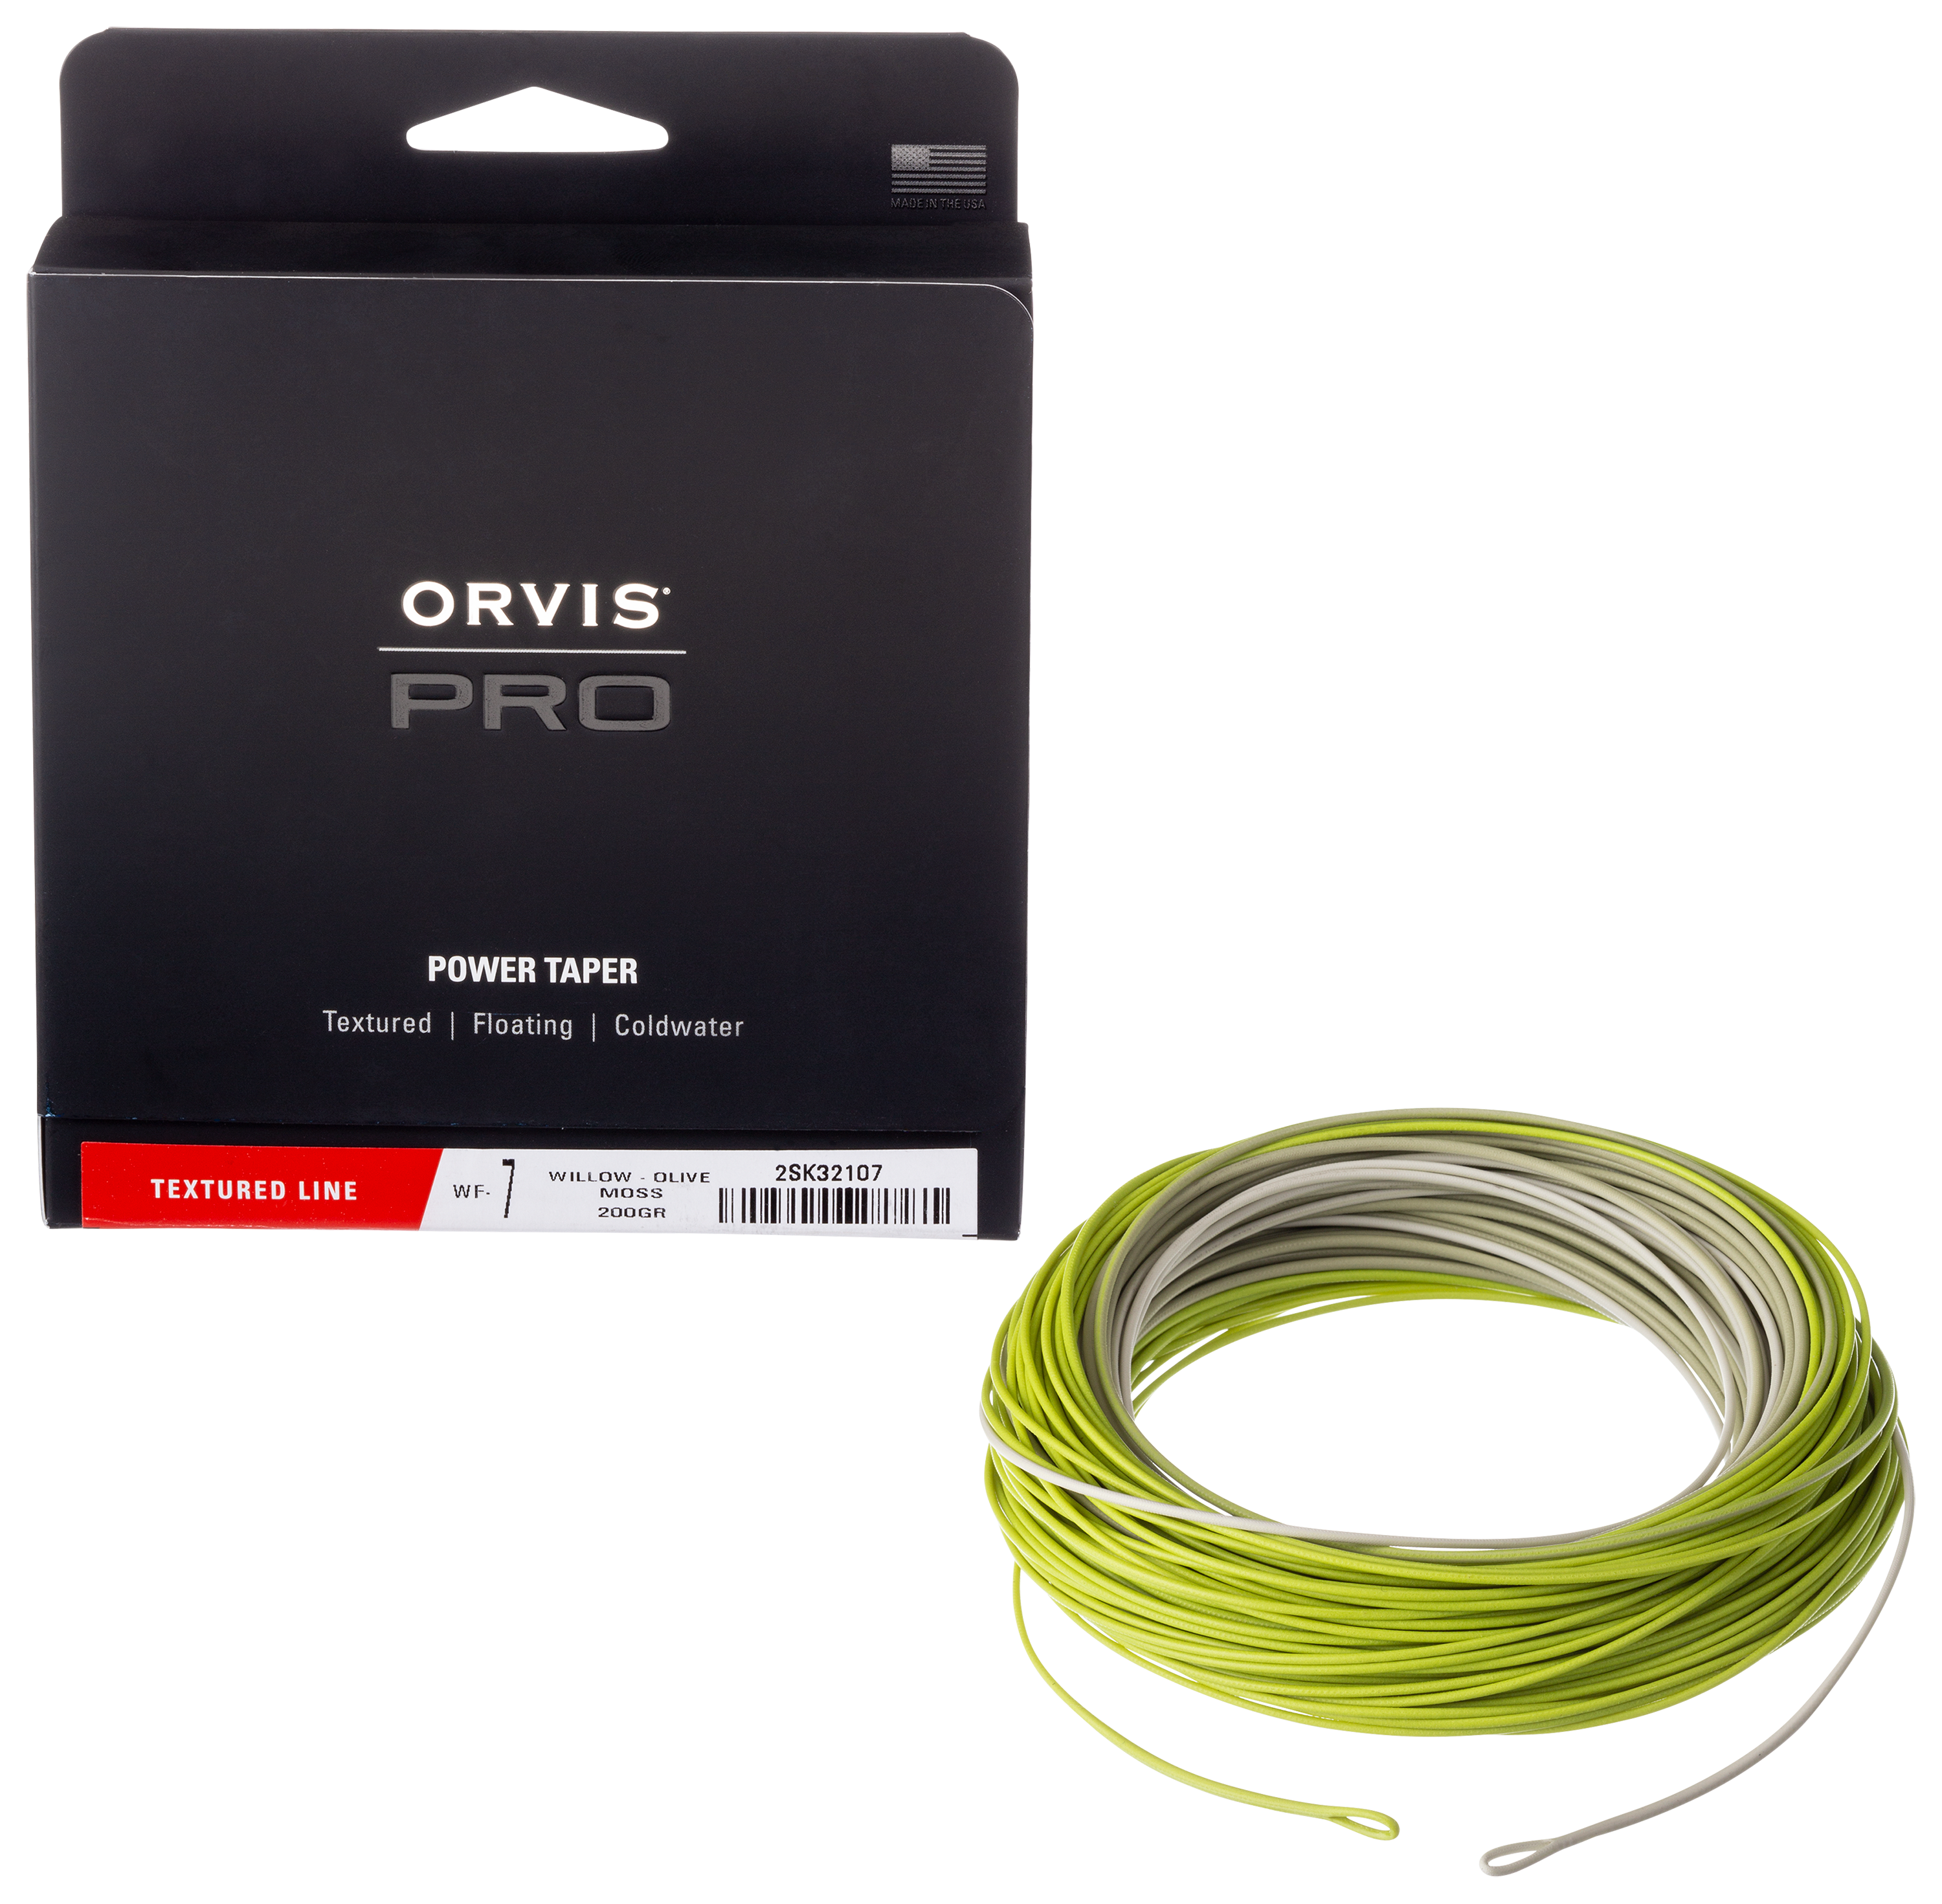 Orvis Pro Power Taper Textured Fly Line - Line Weight 7